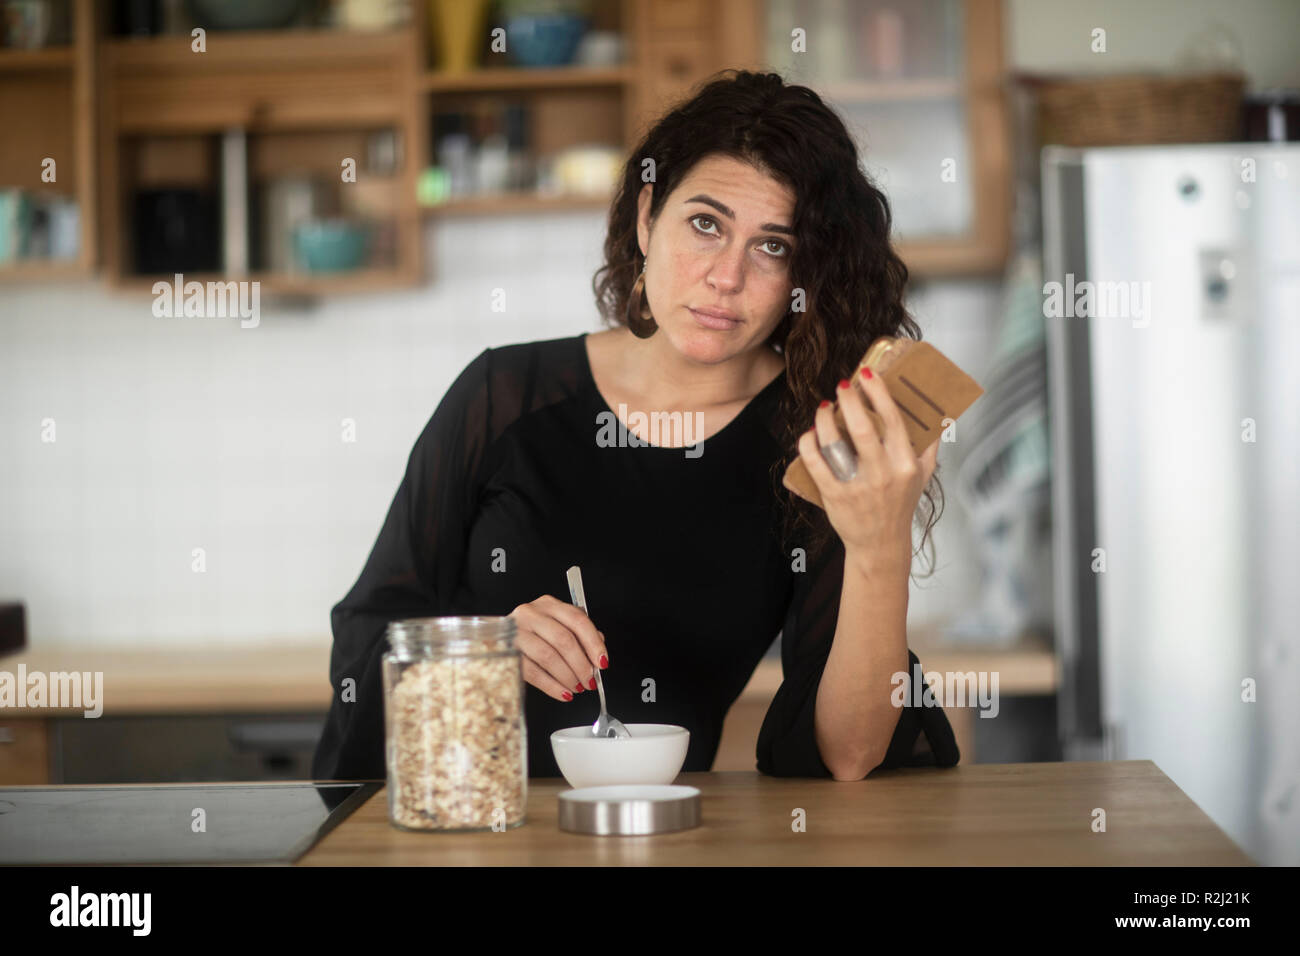 Confused Woman sitting at kitchen counter eating breakfast while looking at her mobile phone Stock Photo